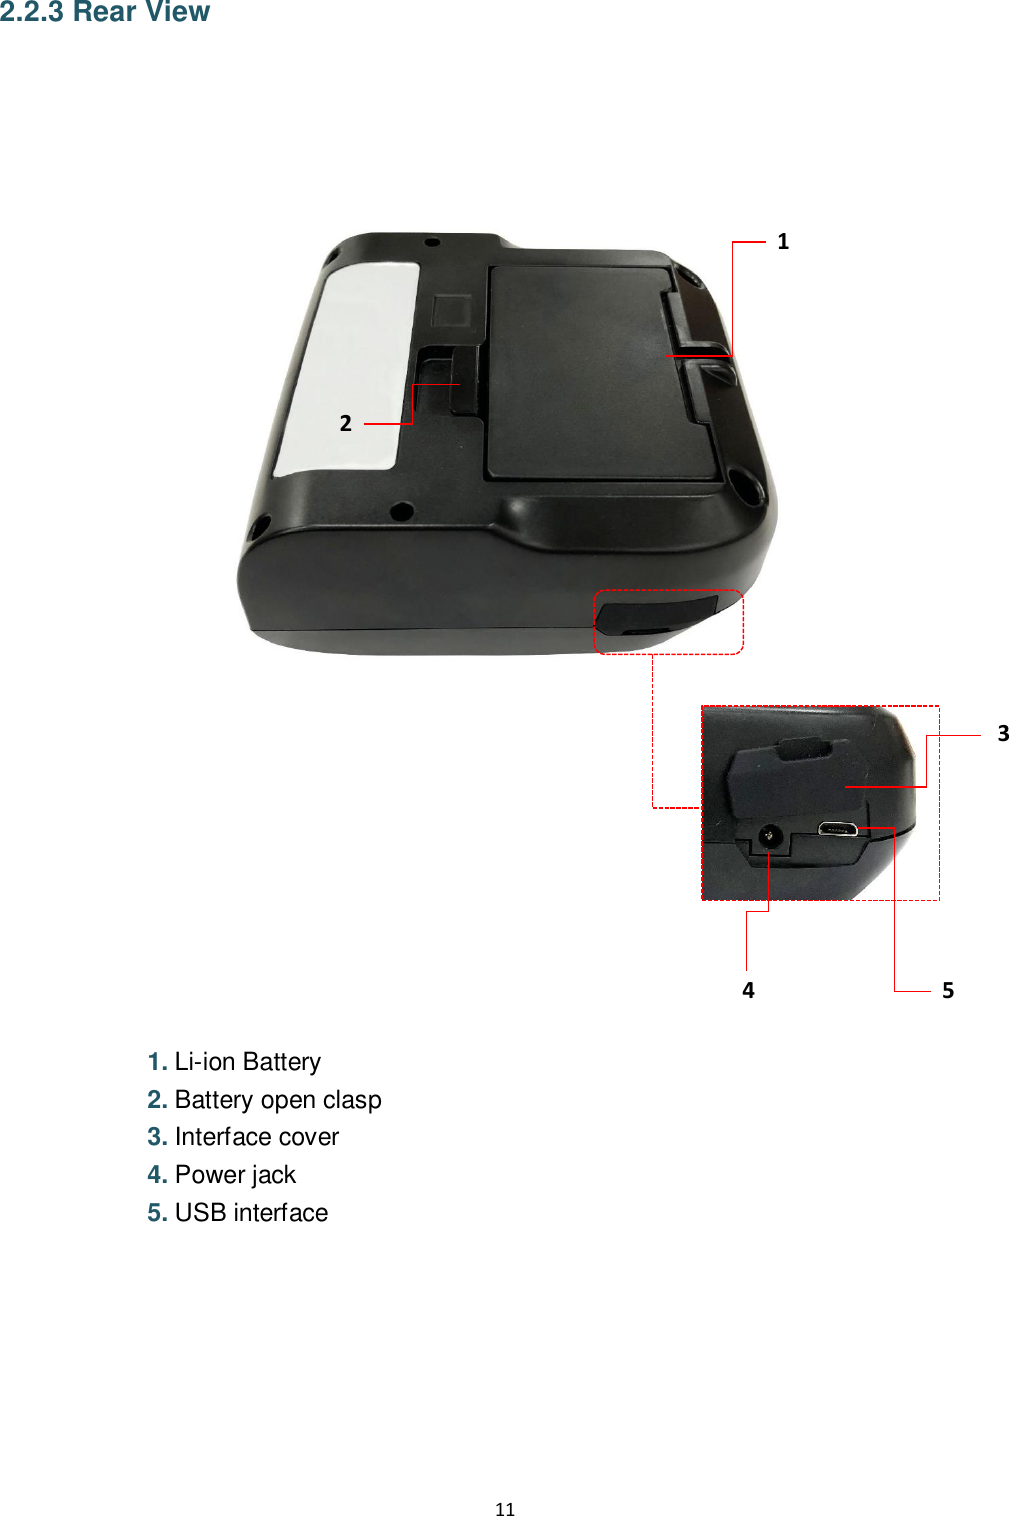 11  2.2.3 Rear View                                             1. Li-ion Battery 2. Battery open clasp 3. Interface cover   4. Power jack 5. USB interface      1 3 2 4 5 